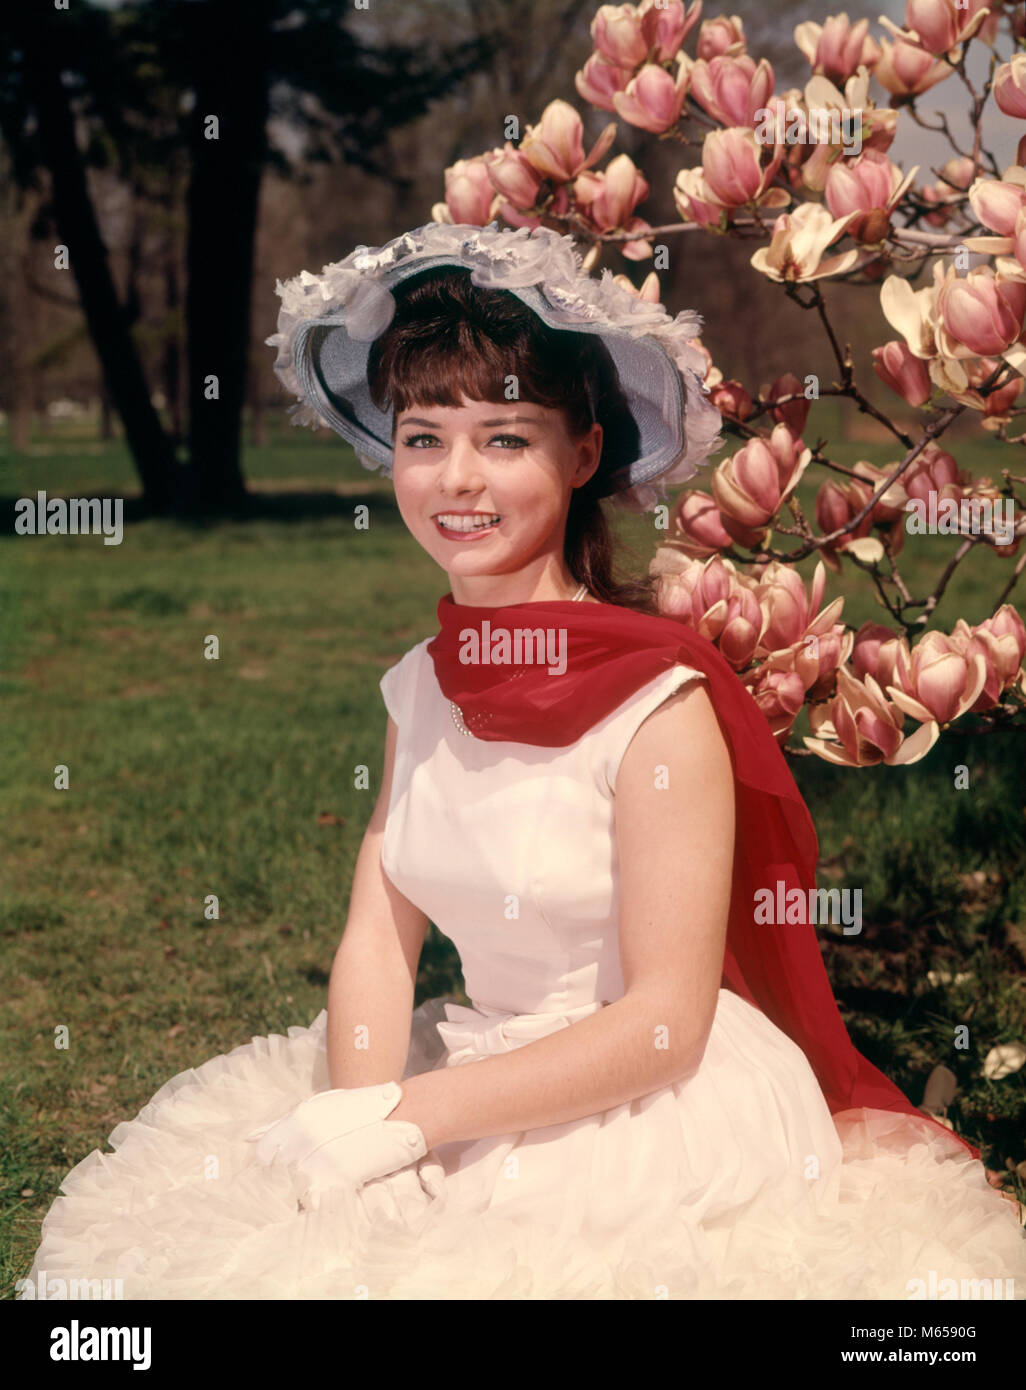 1960s YOUNG WOMAN SITTING BY BLOSSOMING MAGNOLIA TREE WEARING SPRINGTIME HAT RED SCARF WHITE GLOVES AND DRESS LOOKING AT CAMERA - kb5213 HAR001 HARS STYLISH SUBURBAN SPRING COLOR OLD TIME FIGURES OLD FASHION 1 JUVENILE STYLE YOUNG ADULT CAUCASIAN PLEASED JOY LIFESTYLE BEAUTIFUL FEMALES GROWNUP HEALTHINESS ONE PERSON ONLY COPY SPACE FULL-LENGTH HALF-LENGTH LADIES INSPIRATION SIT GROWN-UP TEENAGE GIRL SERENITY NOSTALGIA EYE CONTACT 16-17 YEARS 20-25 YEARS BRUNETTE YOUNGSTER HAPPINESS CHEERFUL LEISURE RELAXATION BLOSSOM 18-19 YEARS POSING SMILES JOYFUL TEENAGED HEAD-WARE SOUTHERN BELLE BLOSSOMS Stock Photo